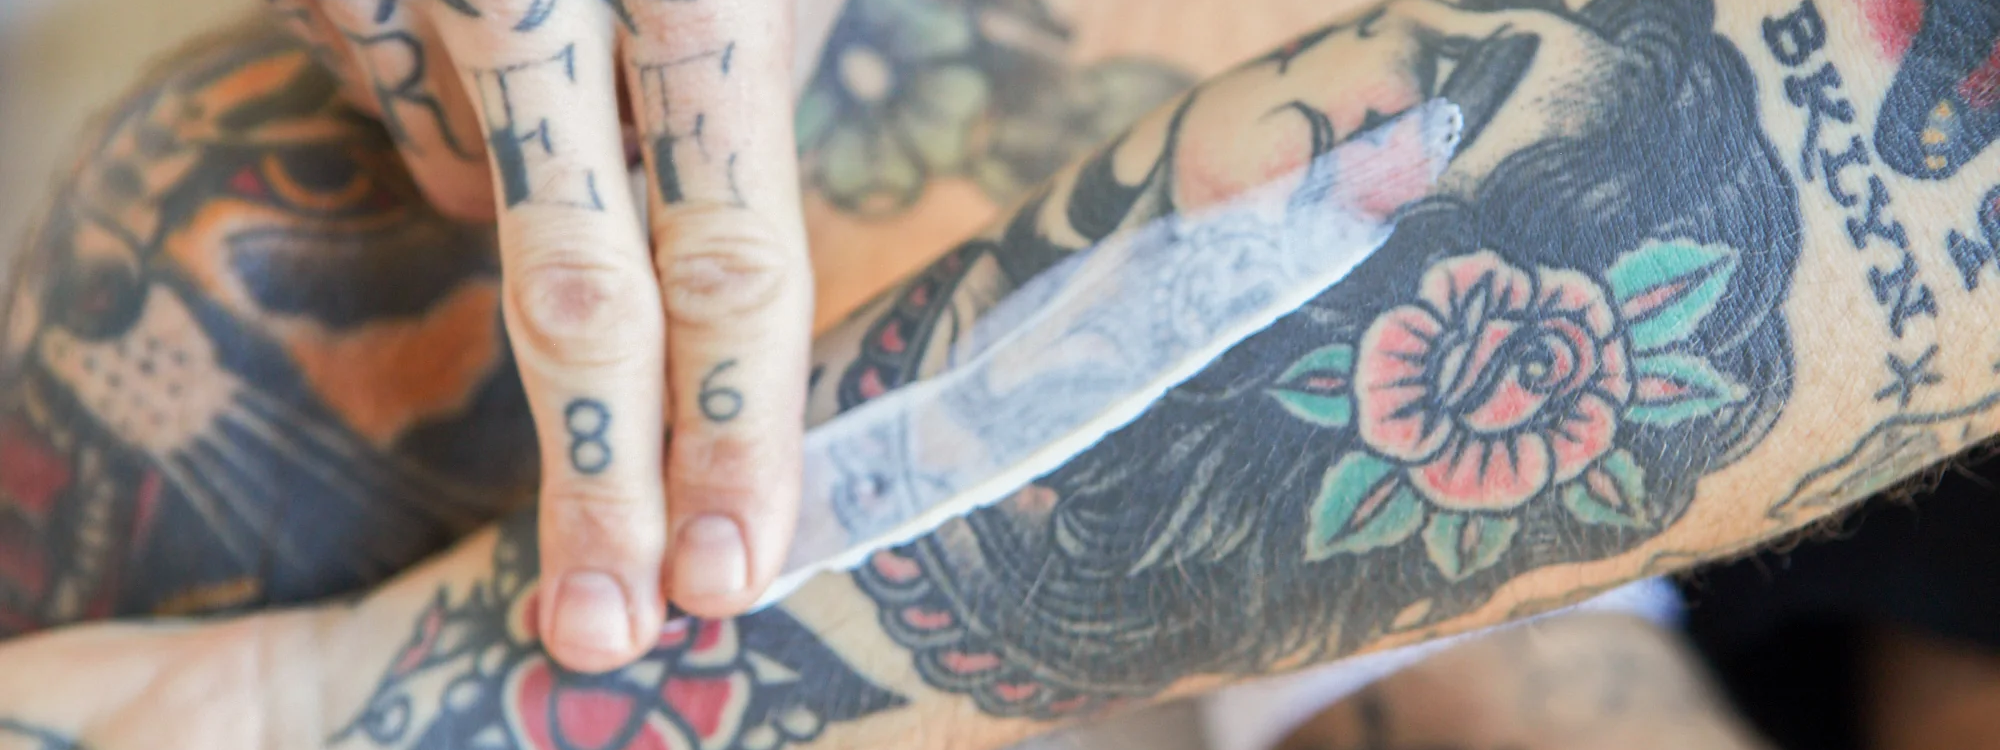 Tattoo Touch Ups: Everything You Need To Know | Skin Design Tattoo